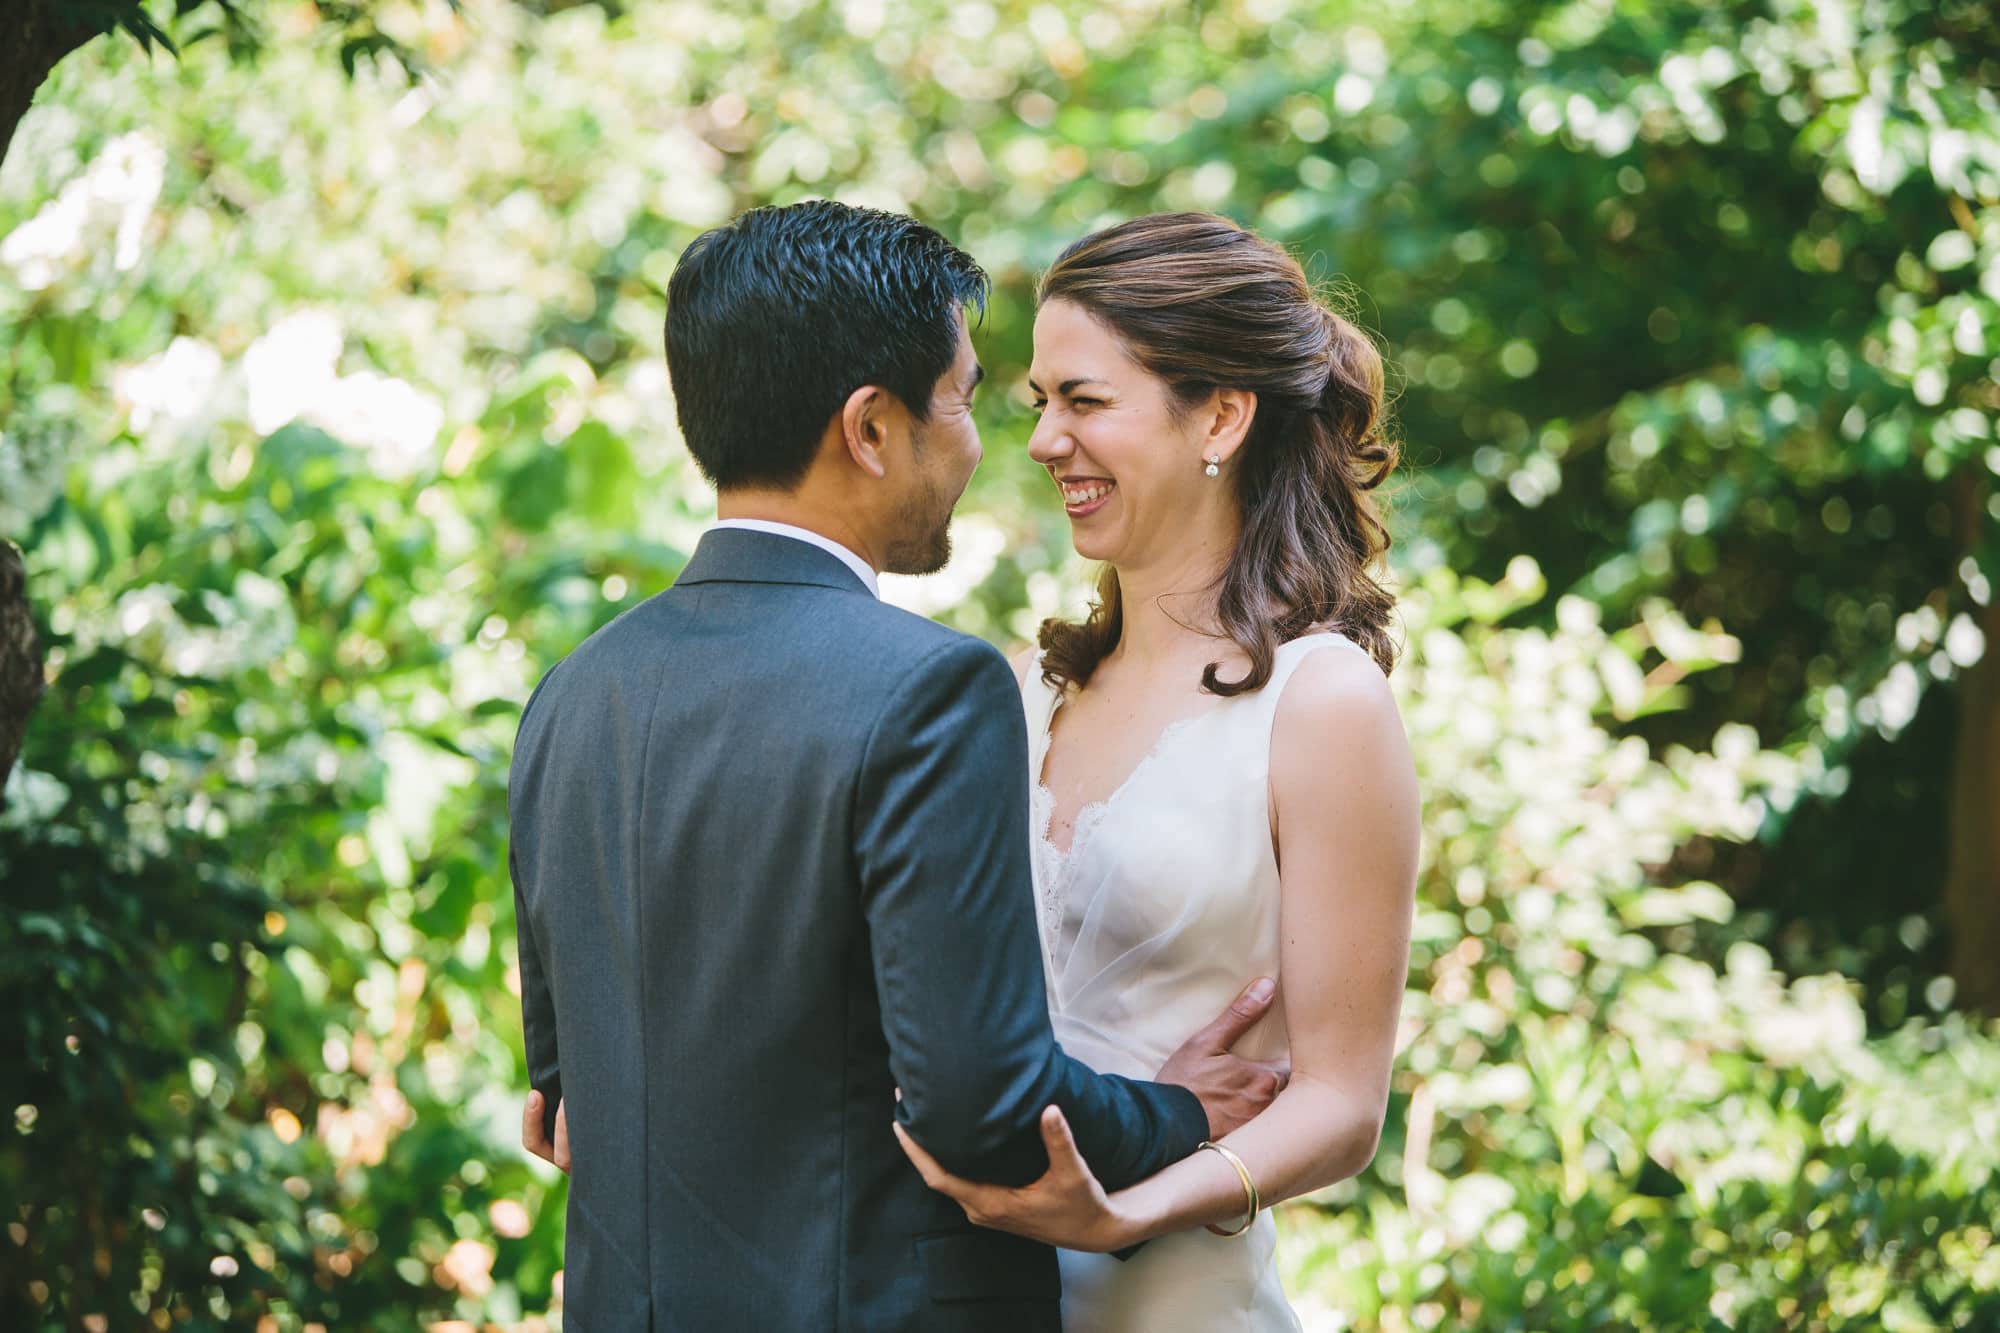 A candid portrait of a bride and groom seeing each other for the first time before their Artists for Humanity Wedding in Boston, Massachusetts